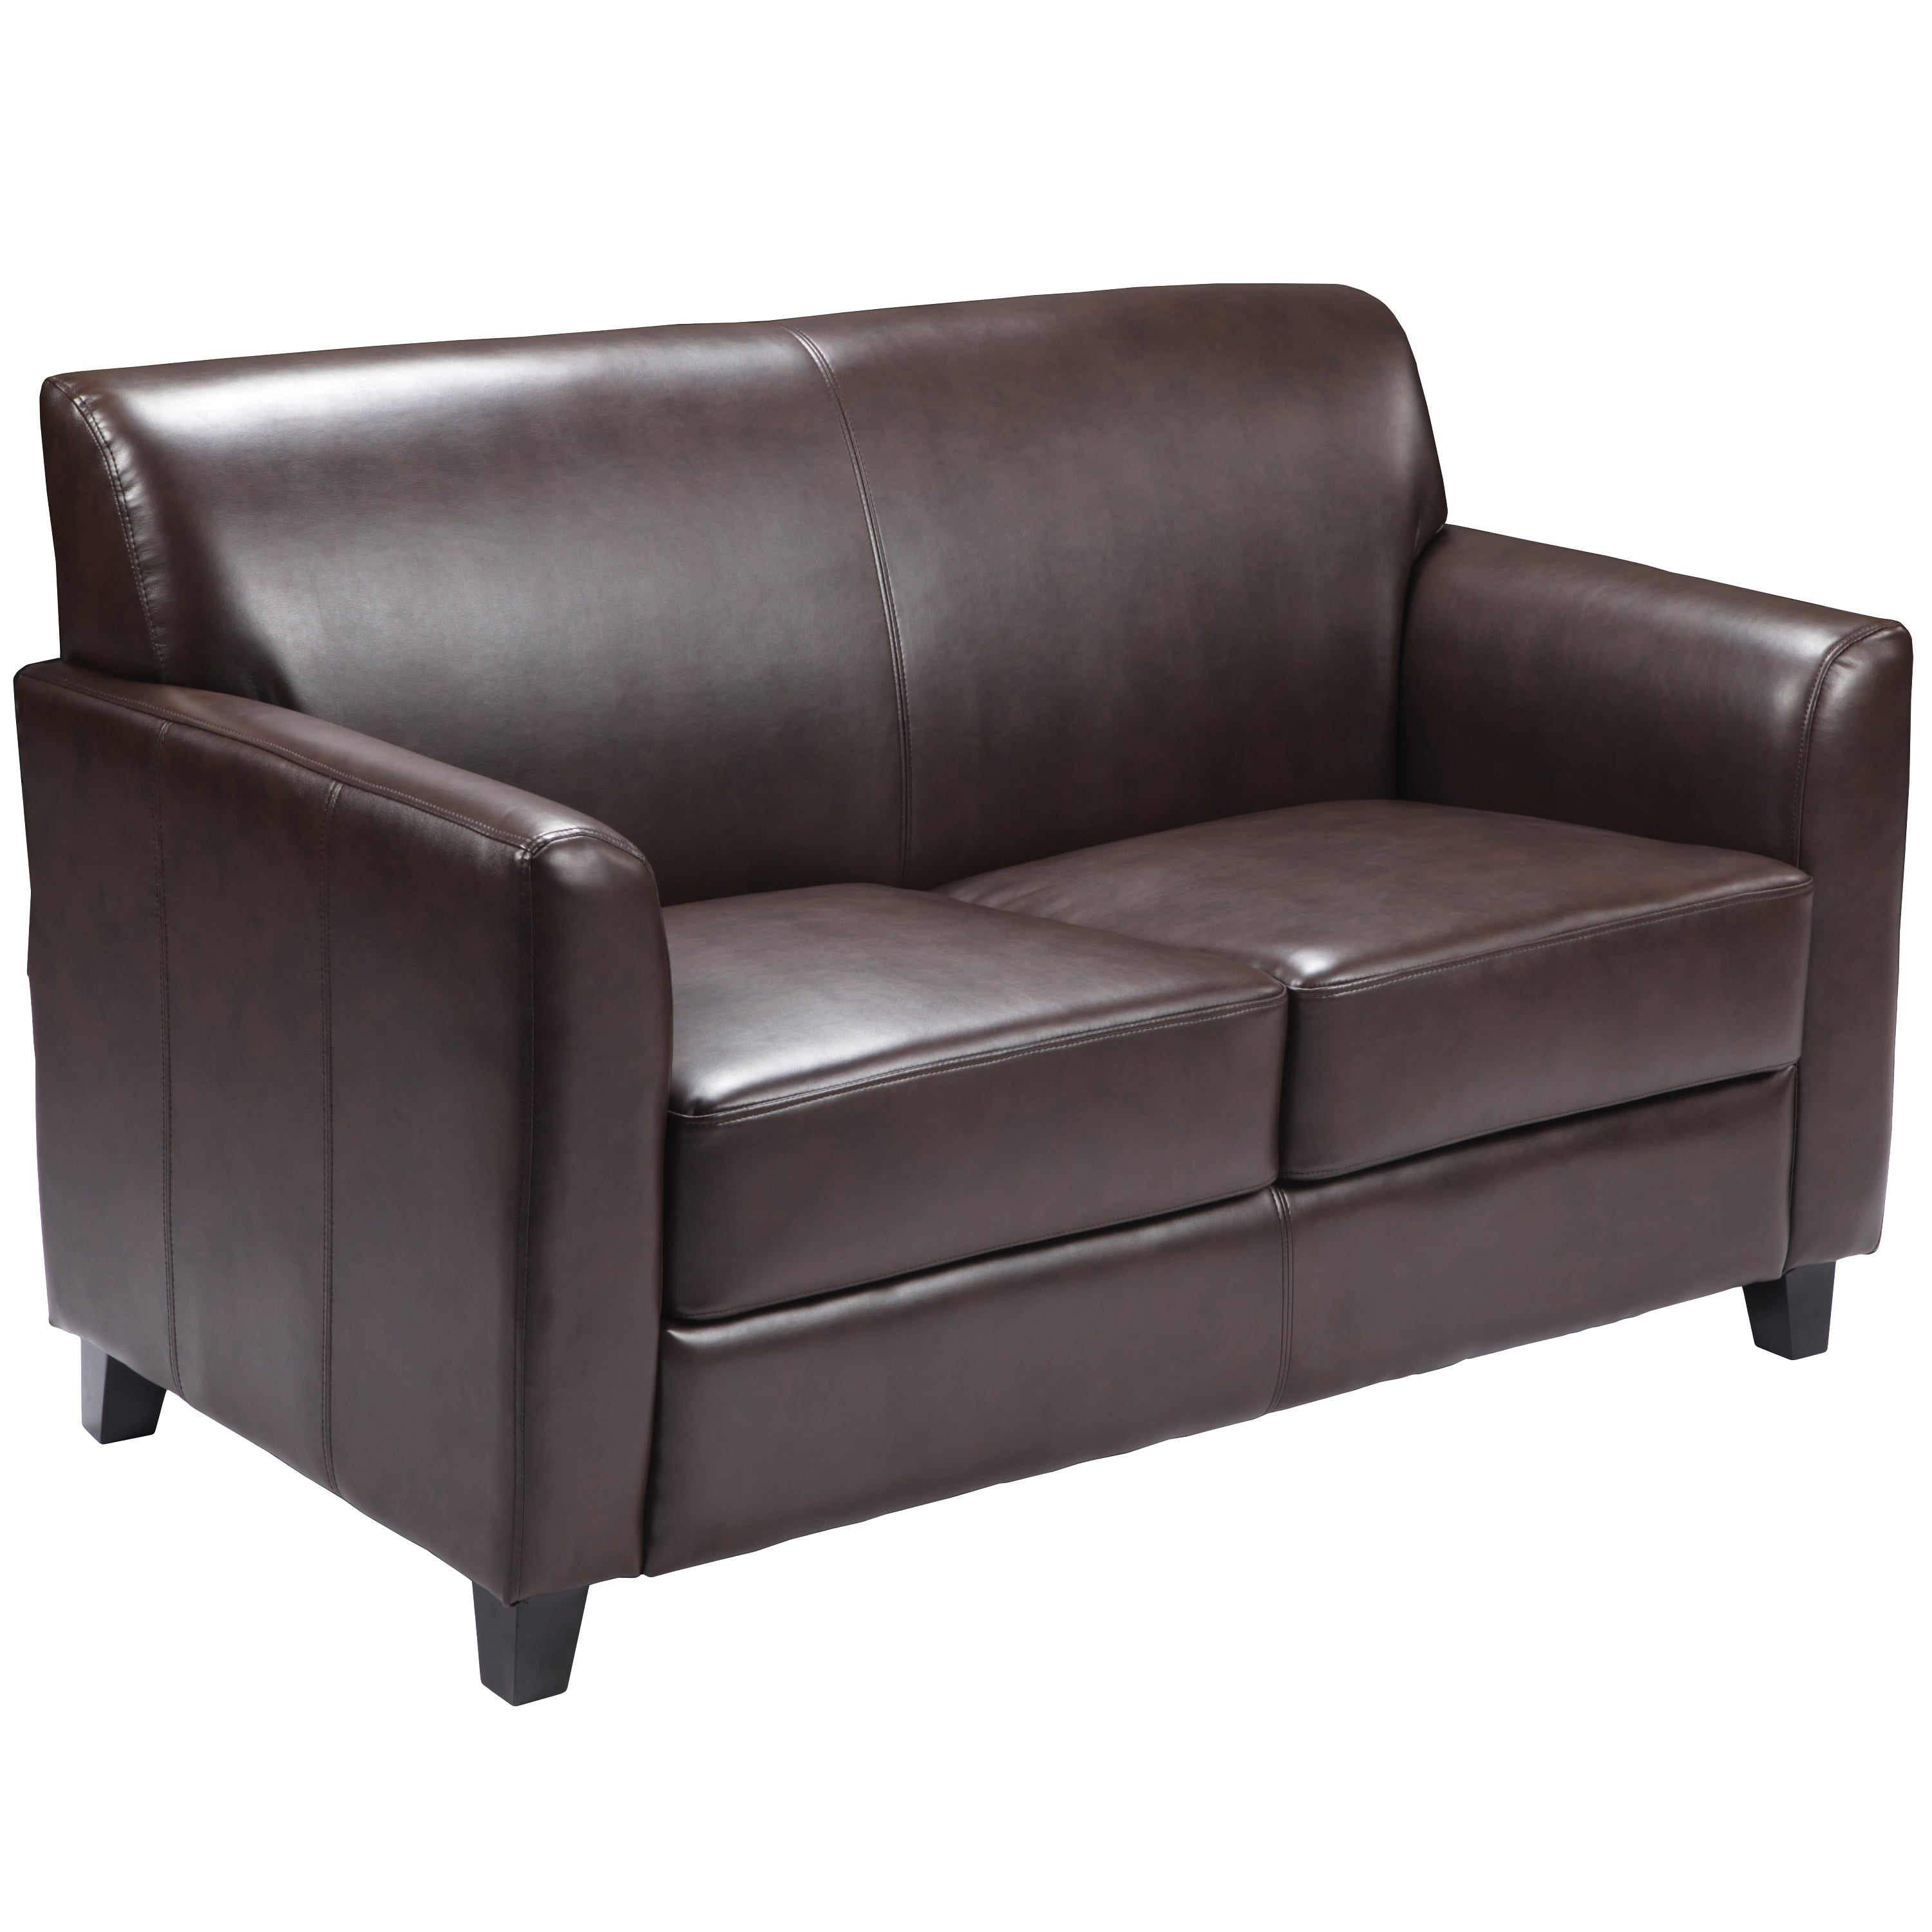 HERCULES Diplomat Series LeatherSoft Loveseat with Clean Line Stitched Frame-Reception Loveseat-Flash Furniture-Wall2Wall Furnishings